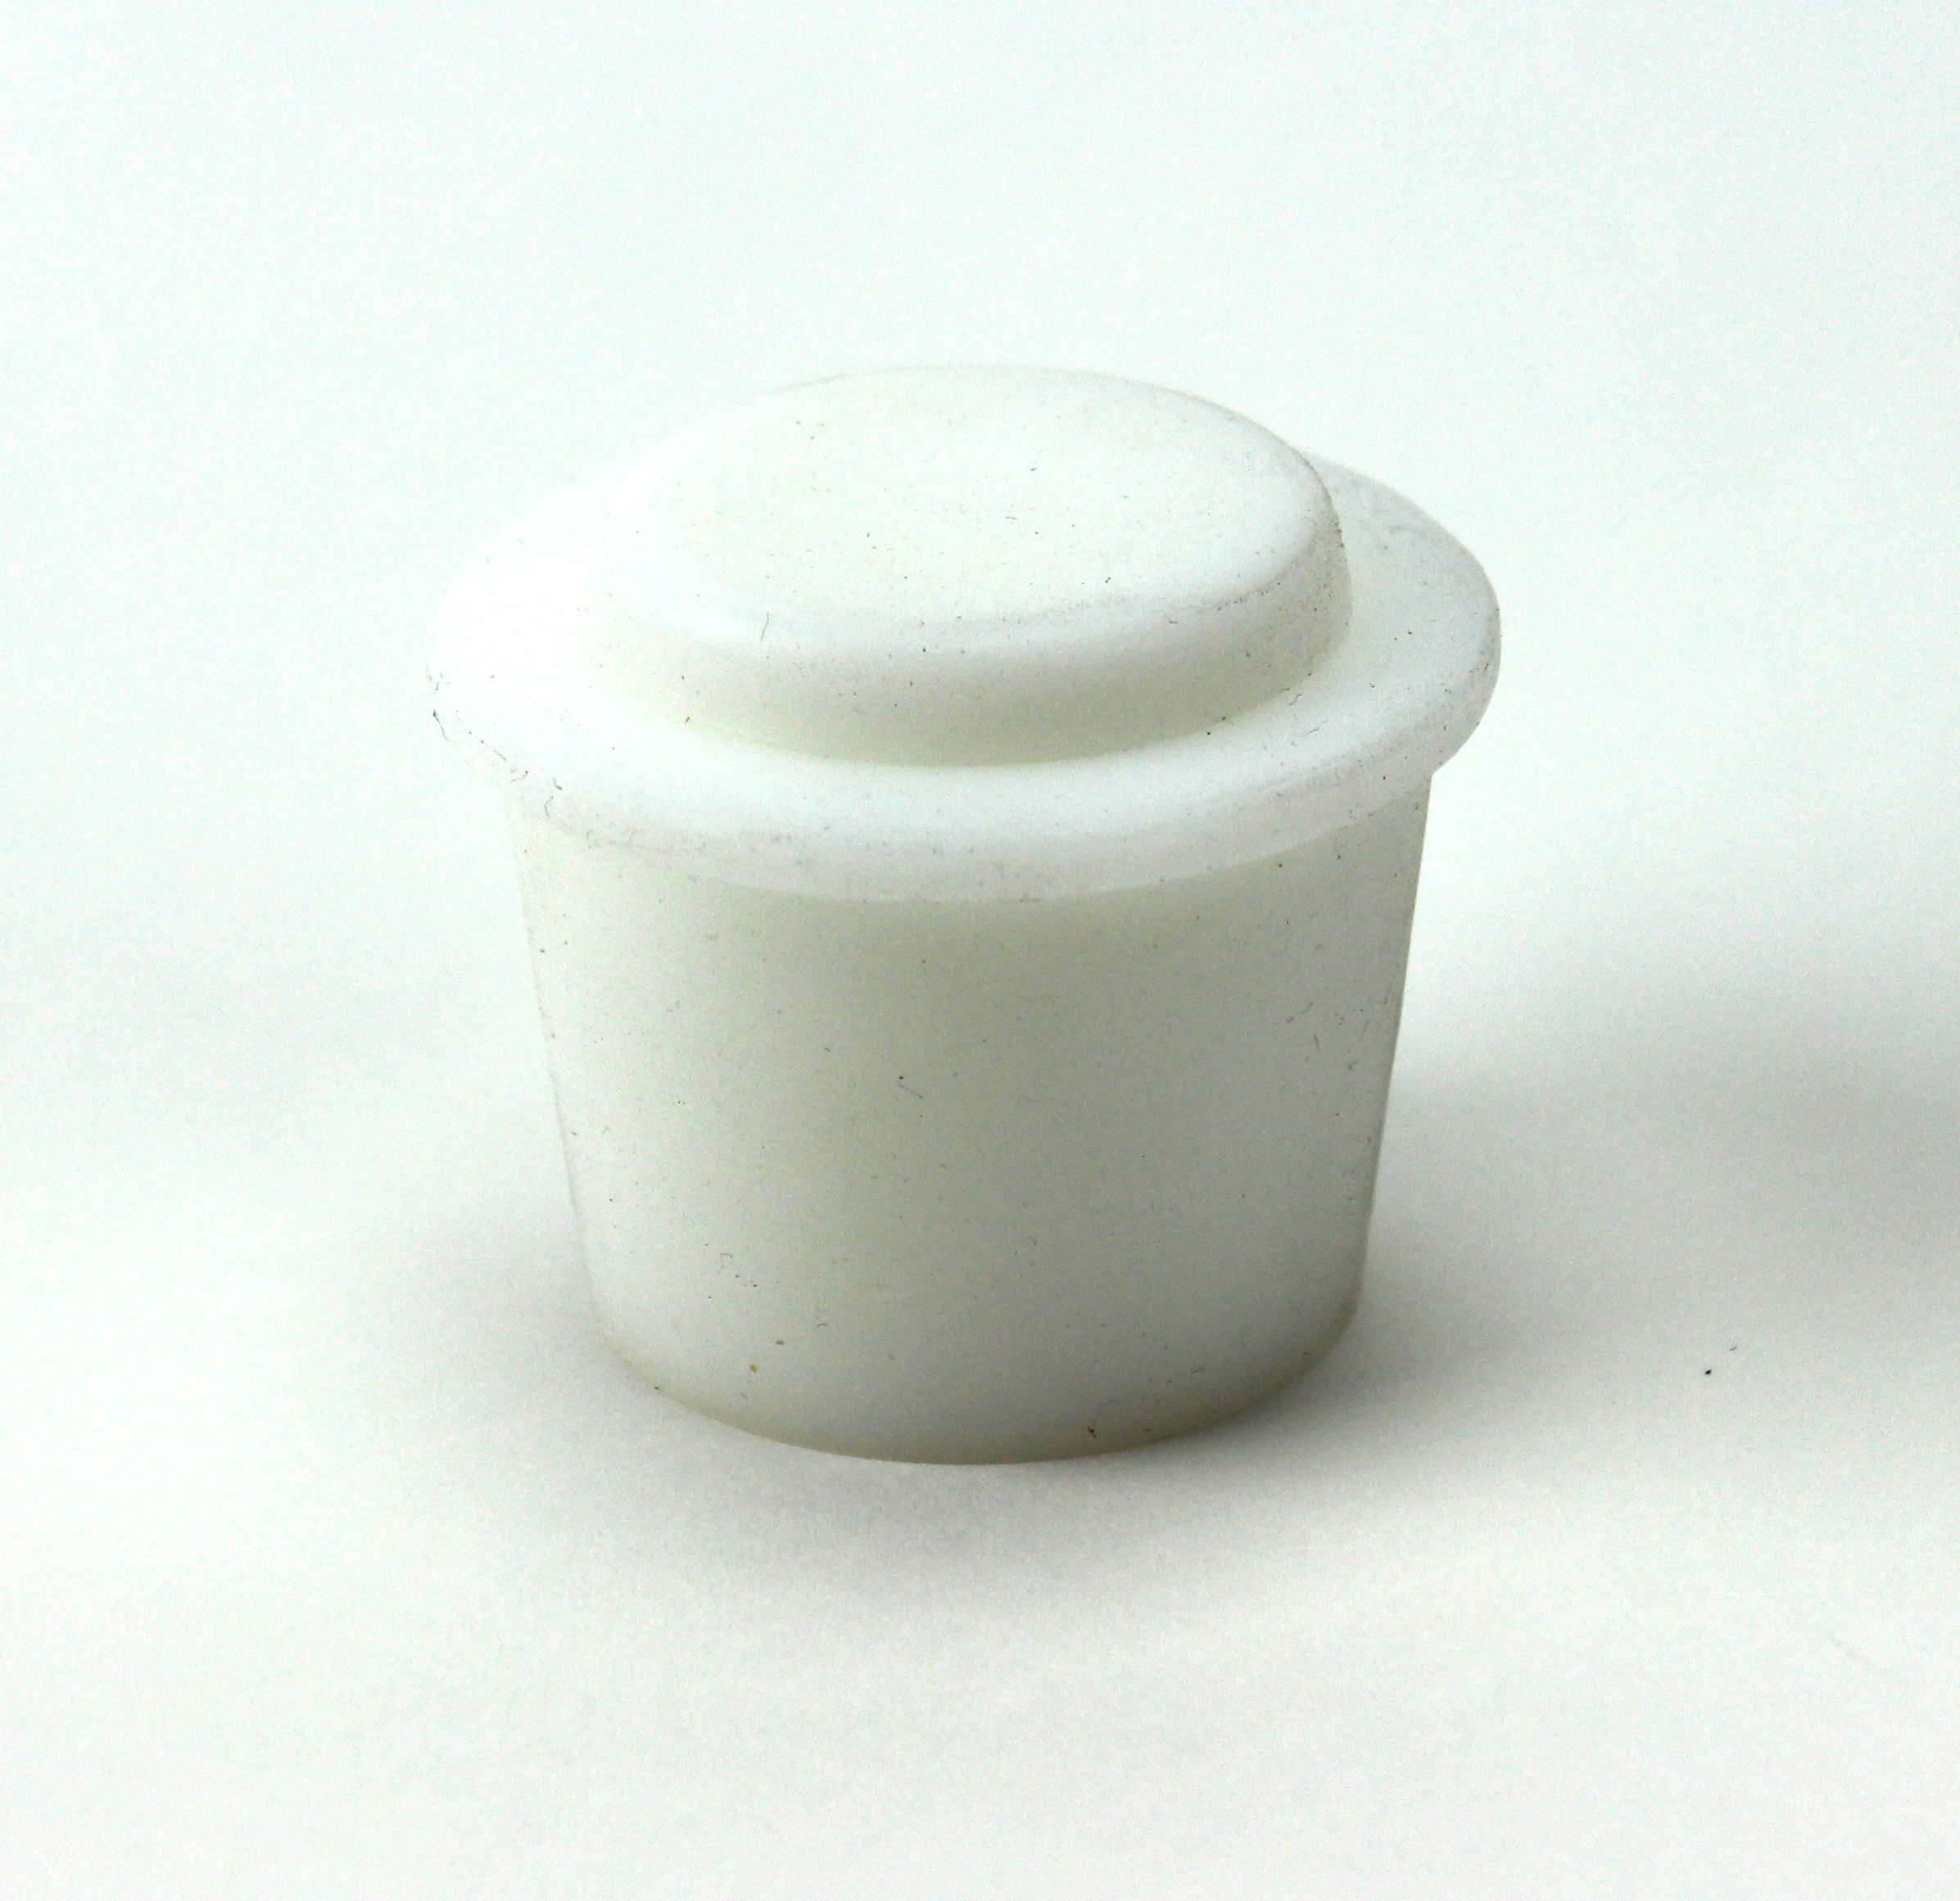 RUBBER Bung Bungs Cork Corks Stopper Stoppers Airlock Bubbler Carboy 5mm SILICONE BUNG 9 